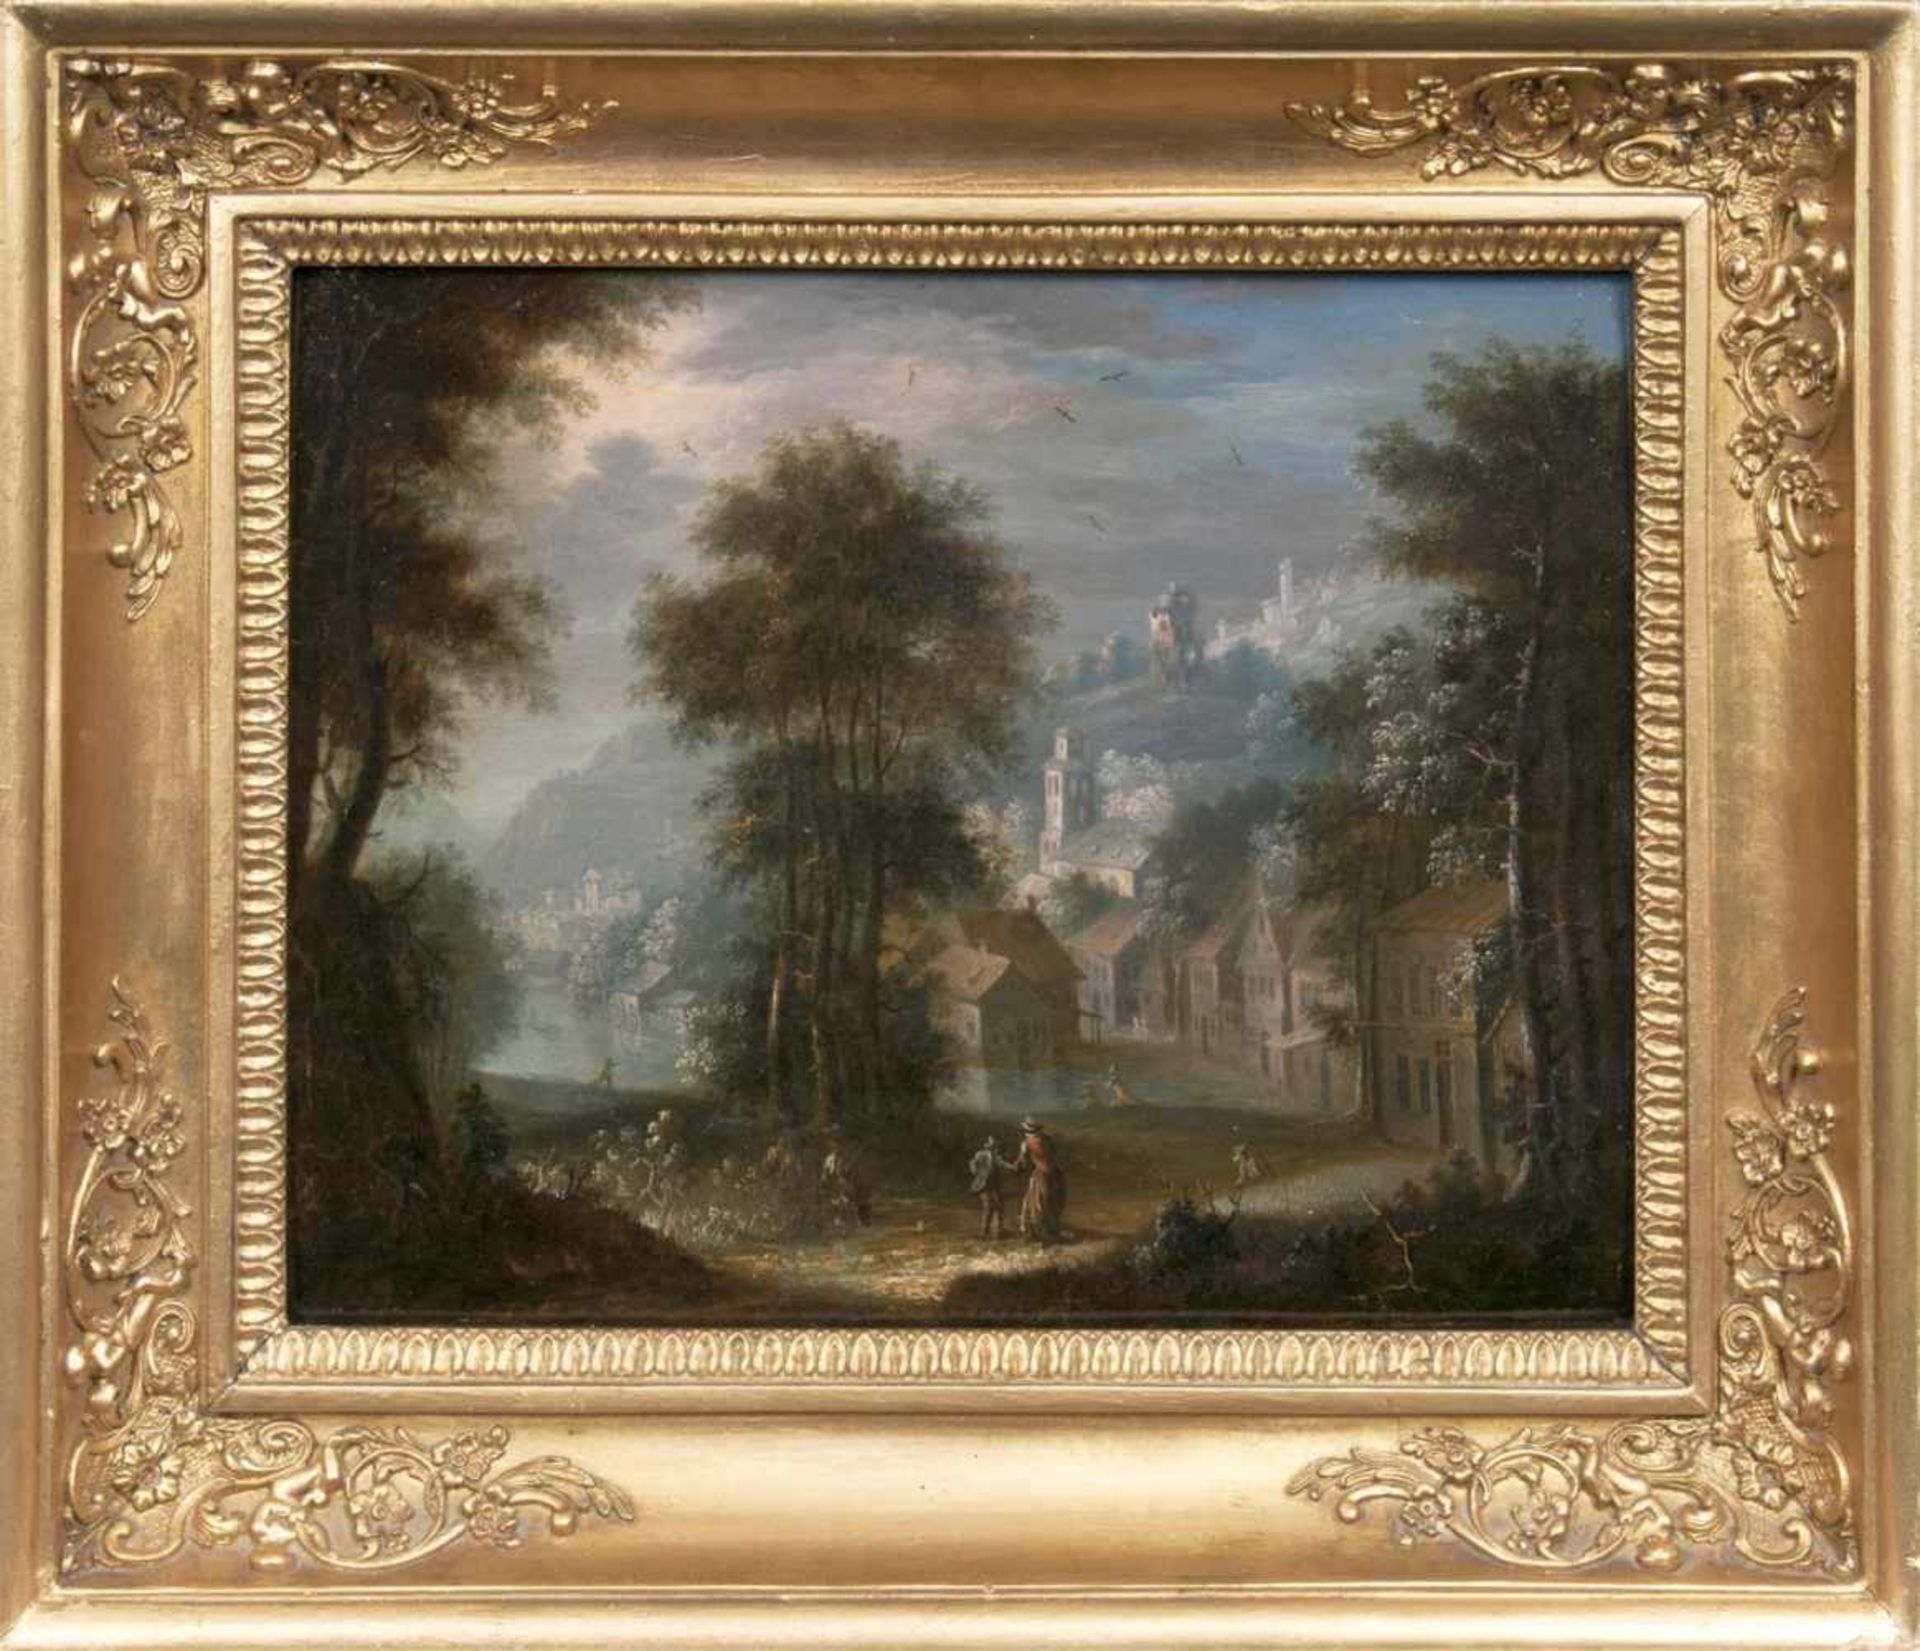 Flemish school17th cent.View of a Town in a River Valleyc. 1650, oil/wood, 27 x 35 cm, on the - Image 2 of 2